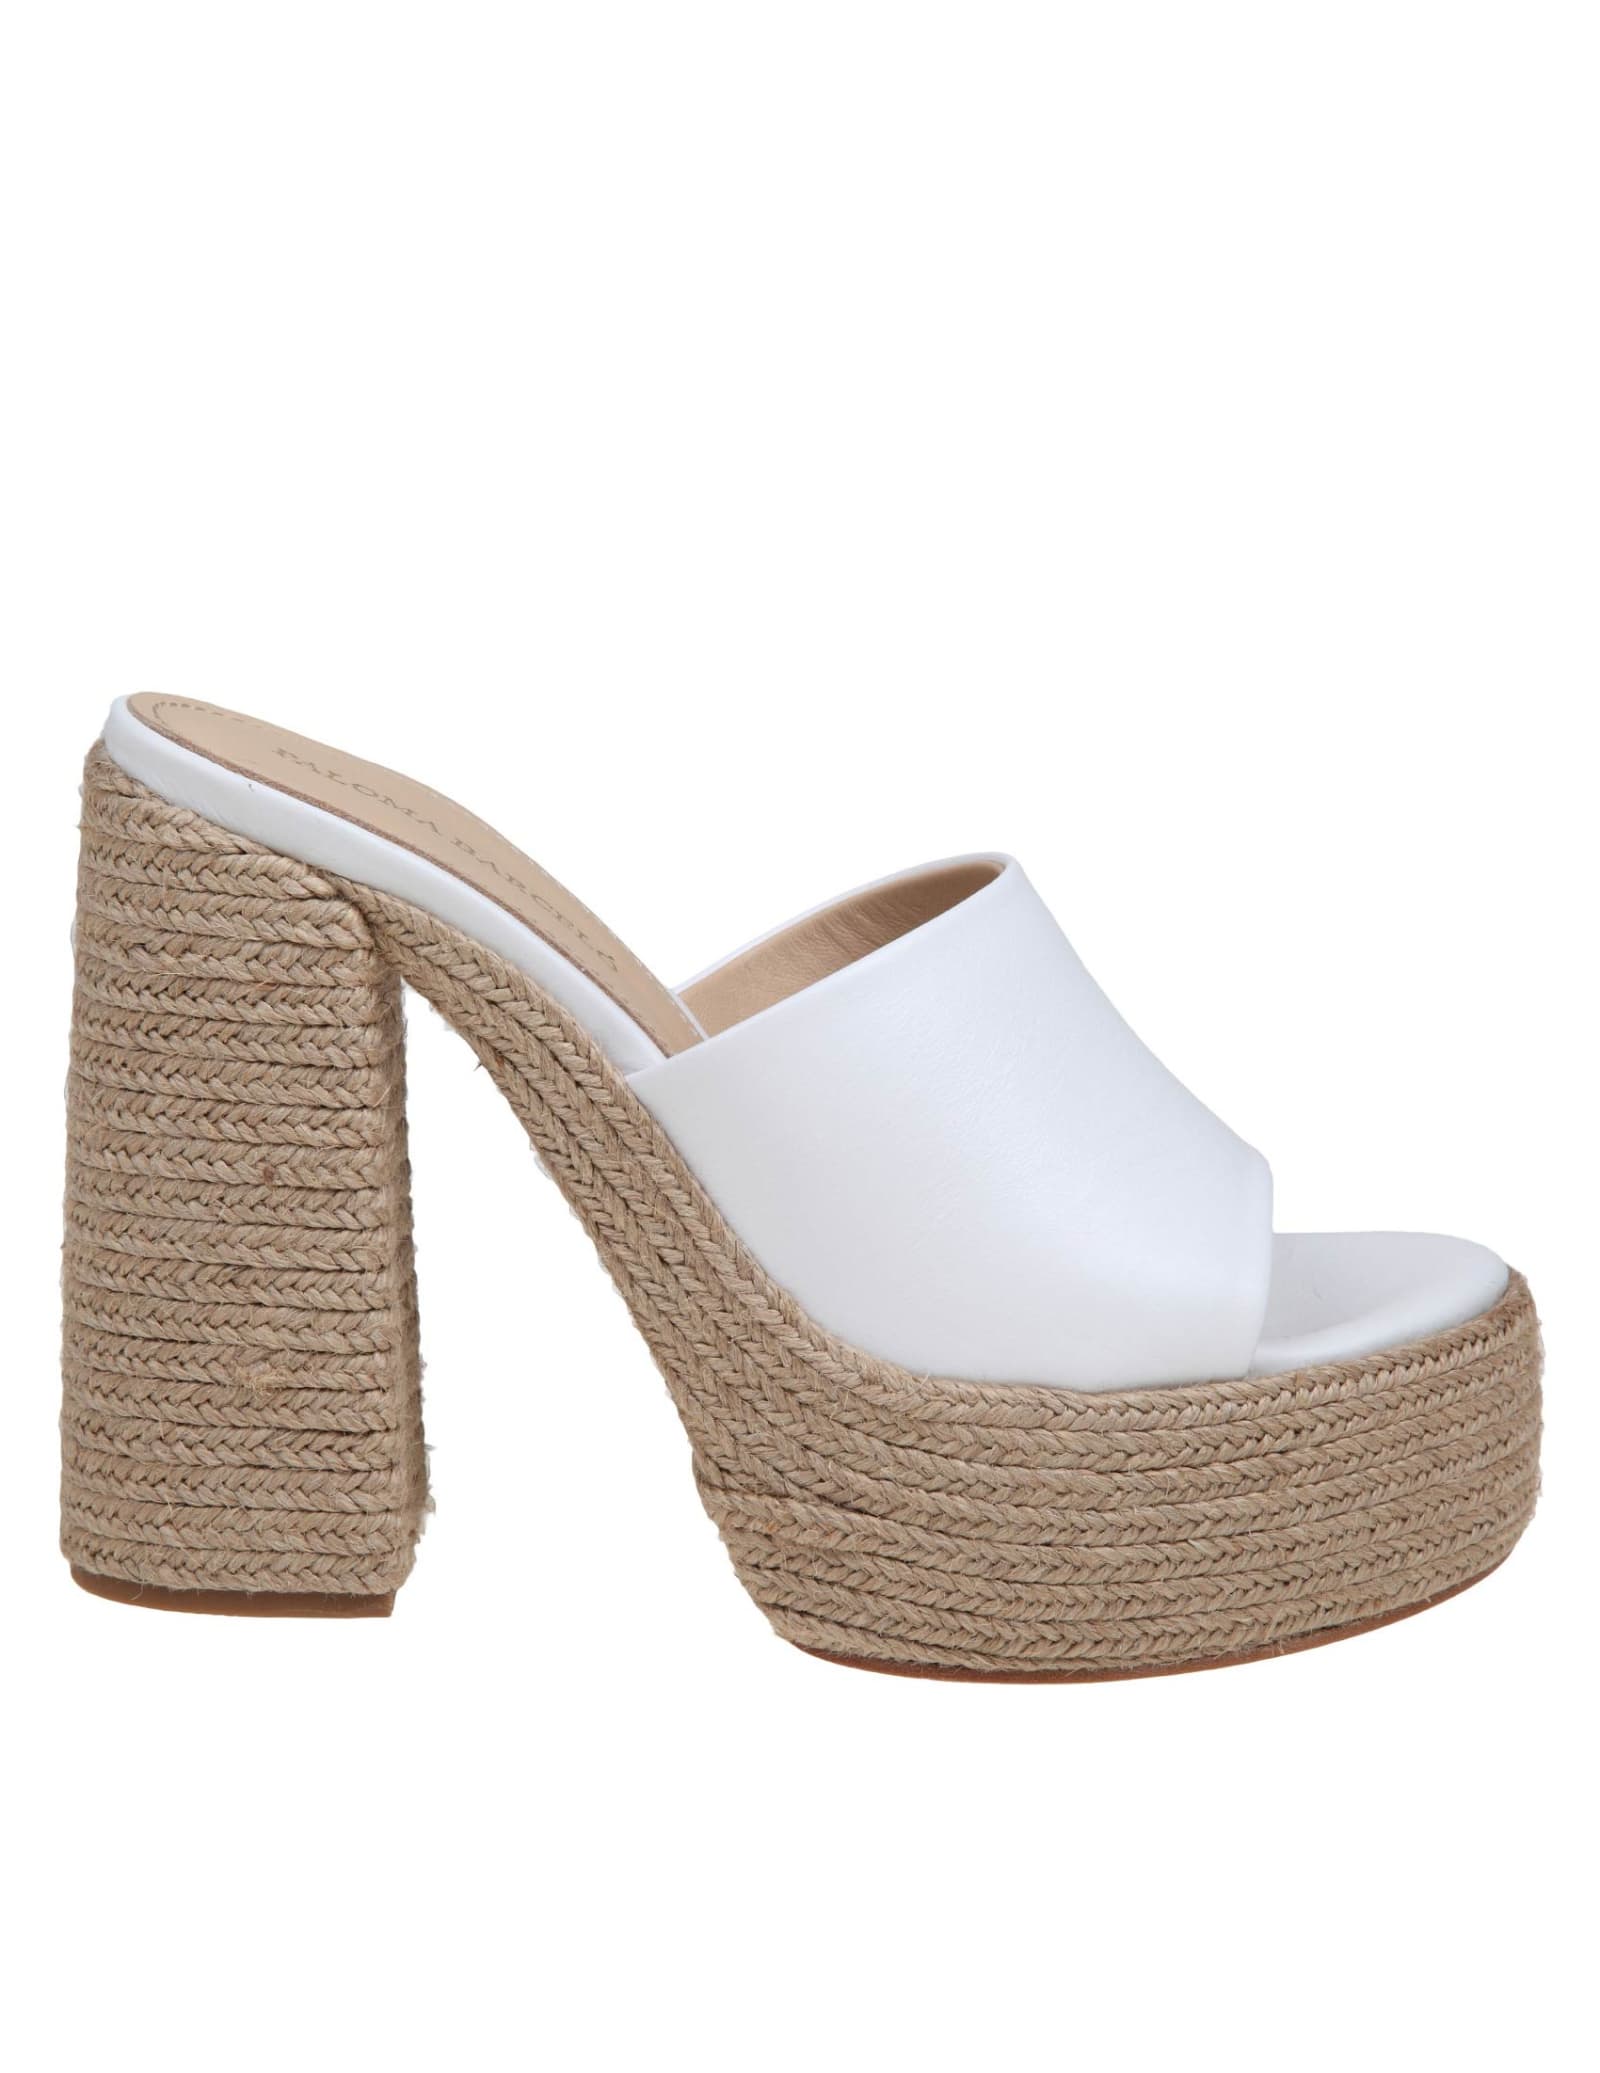 Paloma Barceló Genesia Mules In White Leather